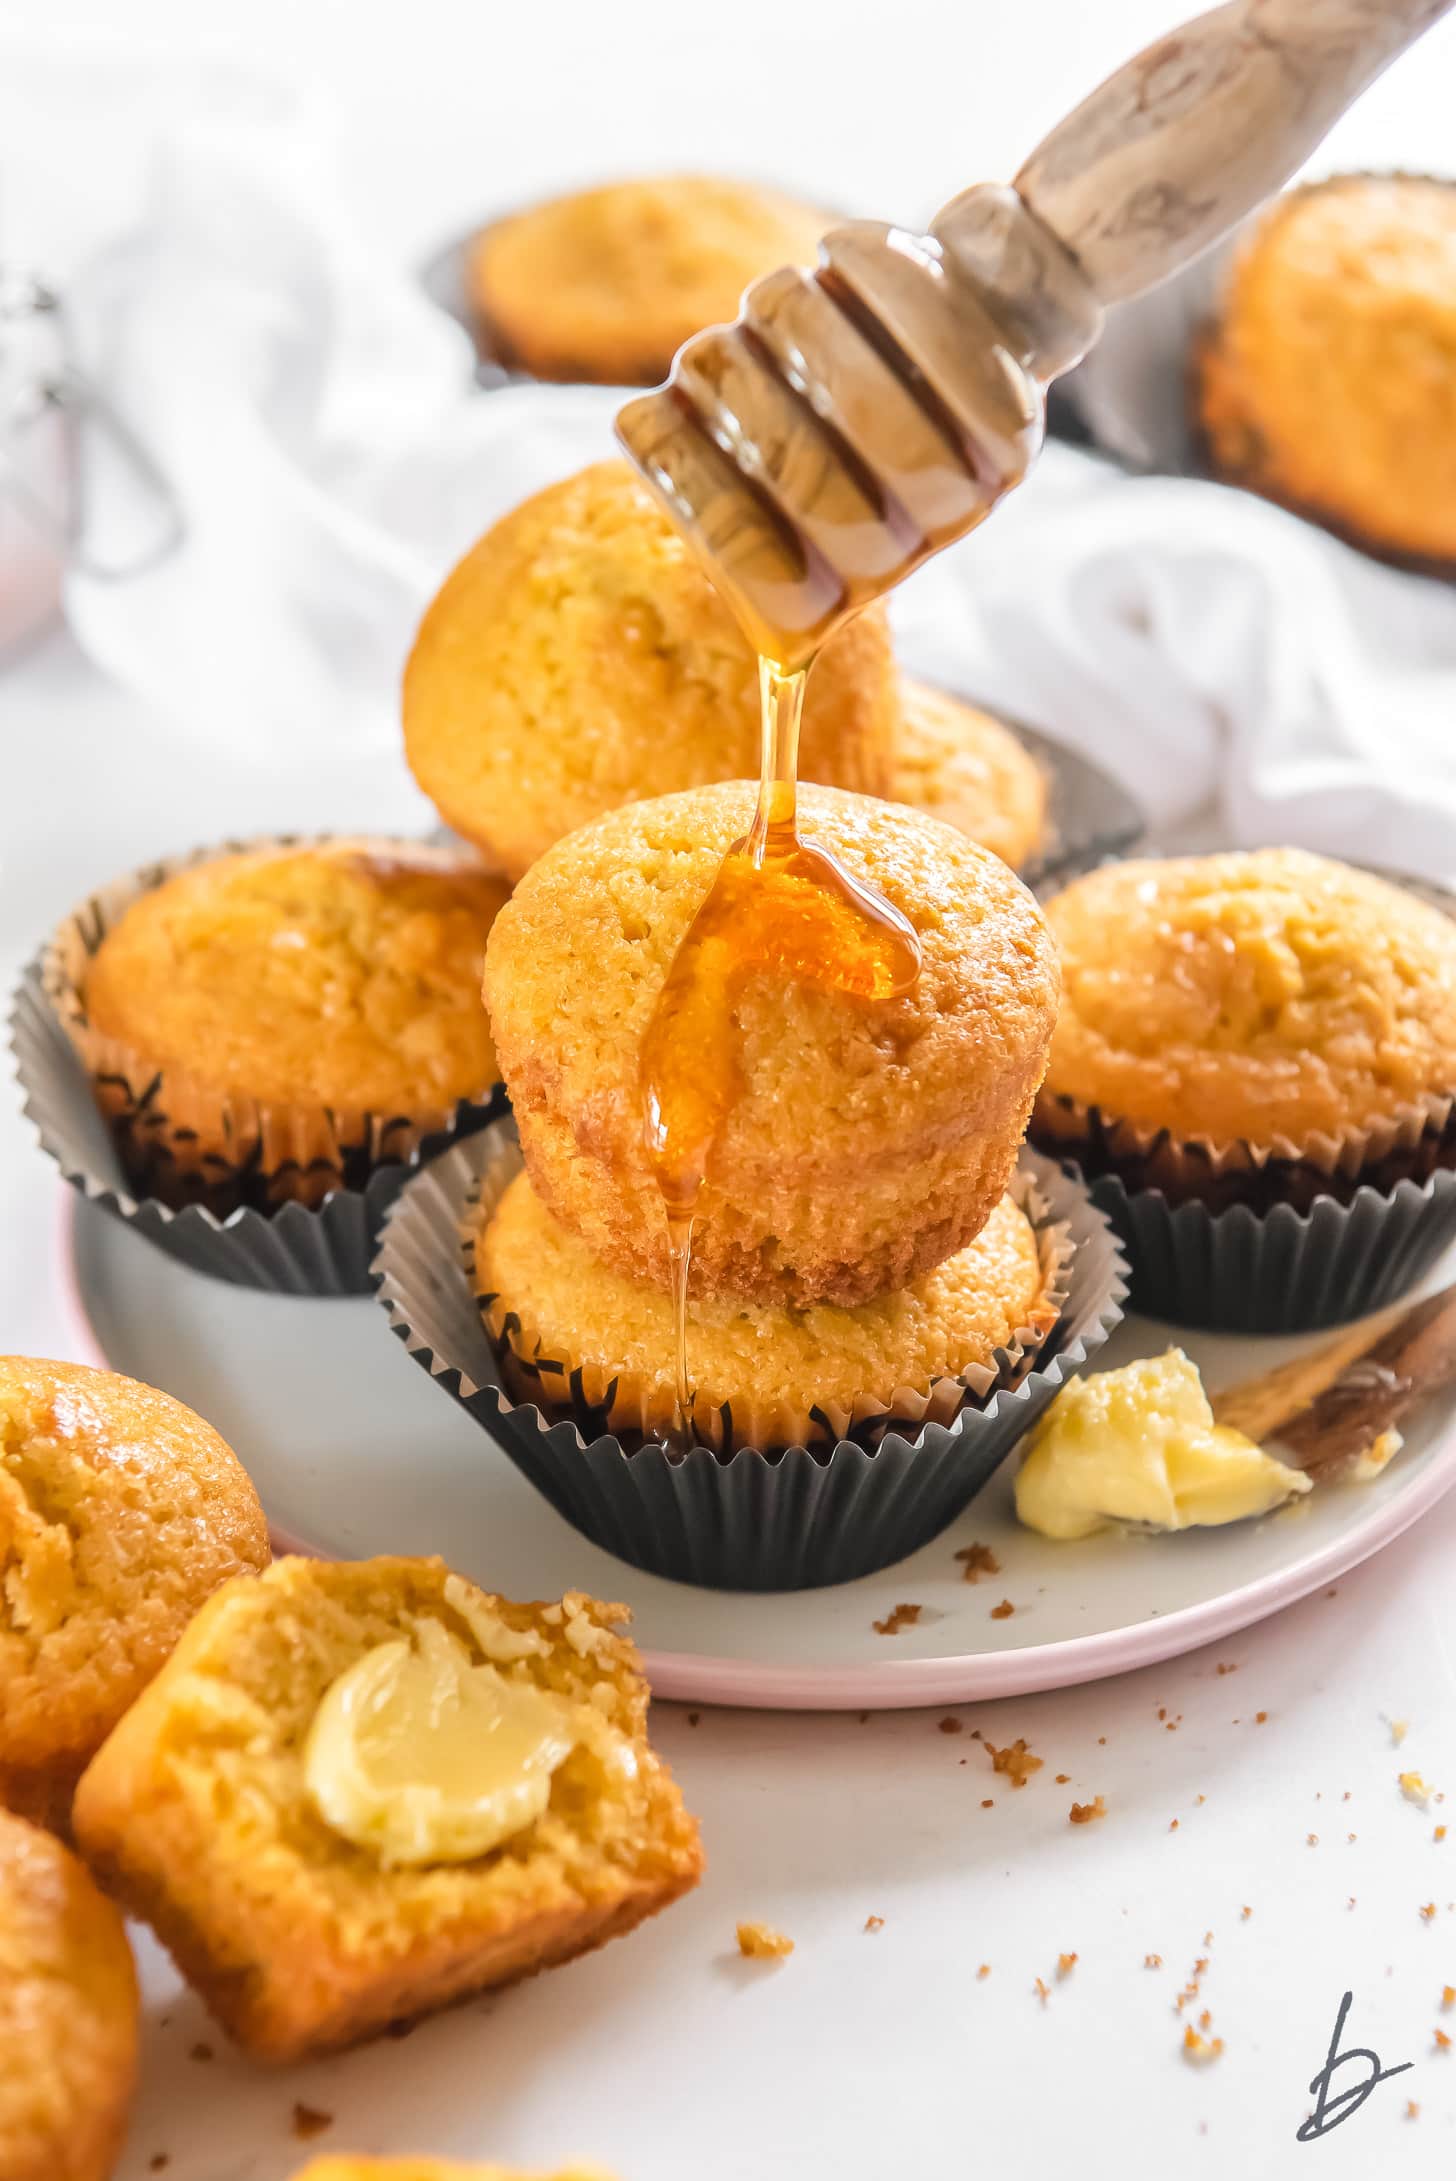 honey being drizzled on top of two cornbread muffins stacked on plate with more muffins